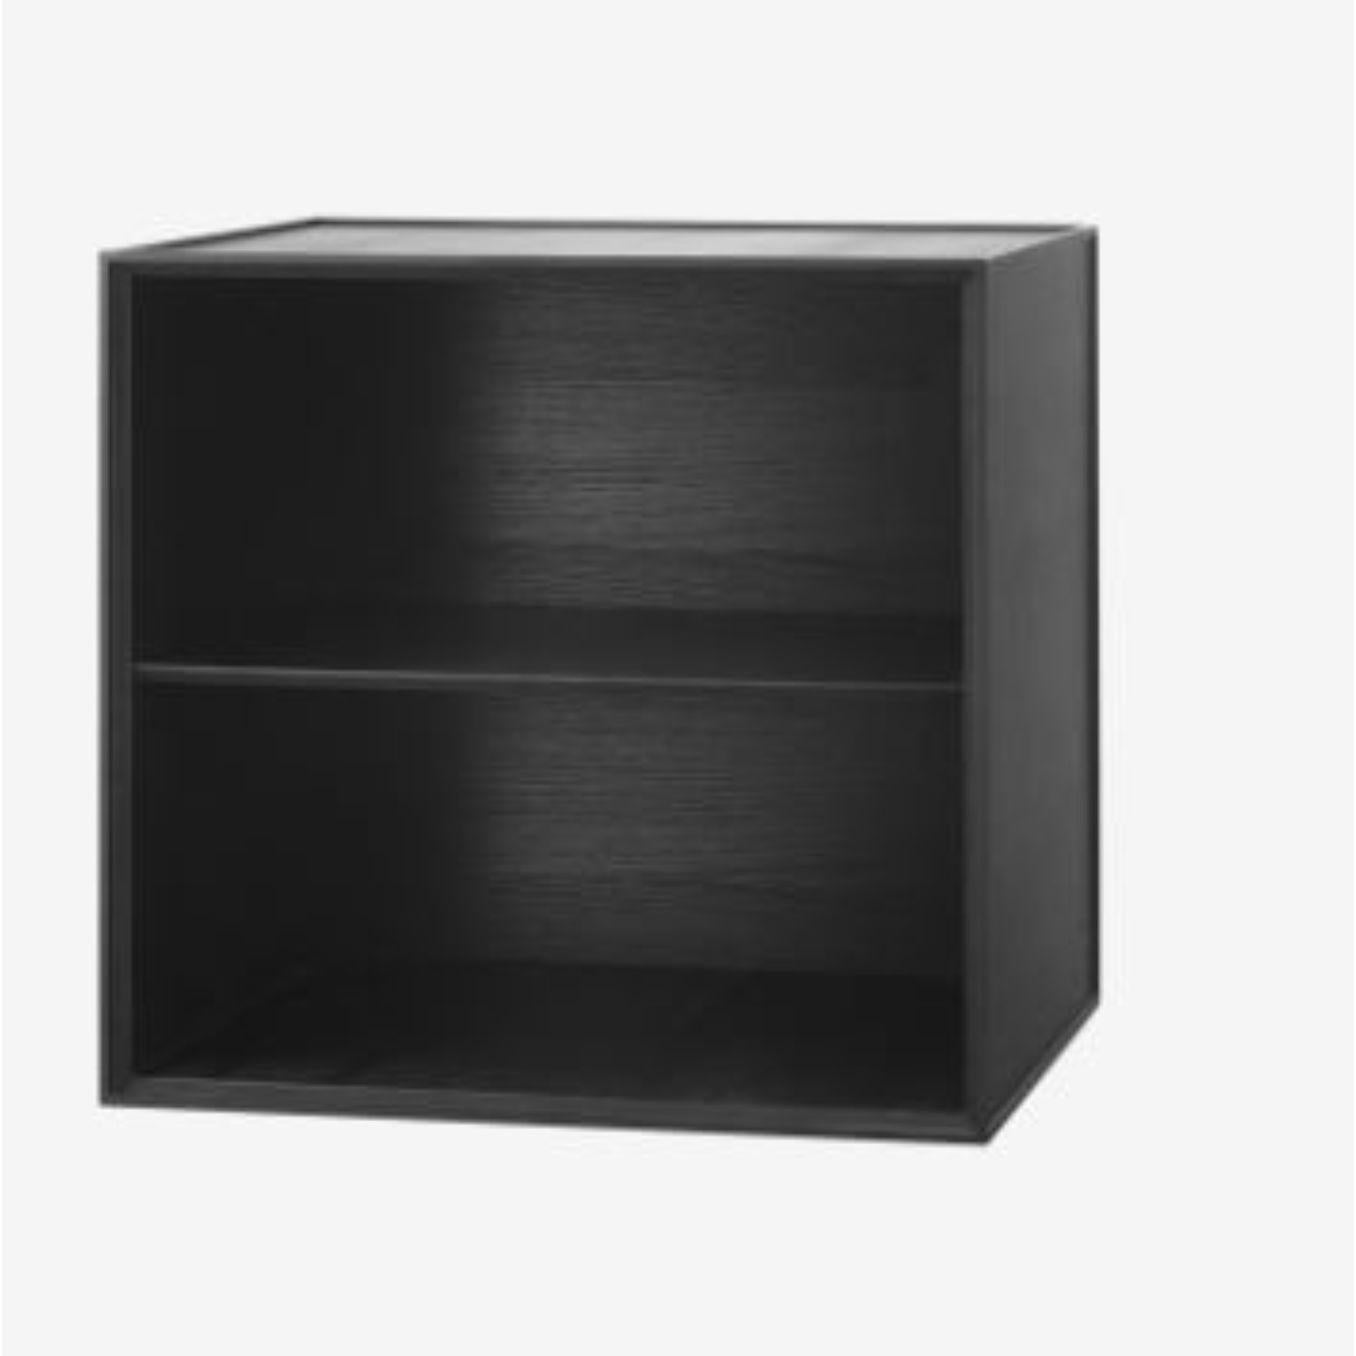 49 Black ash frame box with shelf by Lassen.
Dimensions: D 49 x W 42 x H 49 cm.
Materials: Finér, melamin, melamin, melamine, metal, veneer, ash
Also available in different colours and dimensions. 
Weight: 14 Kg.


By Lassen is a Danish